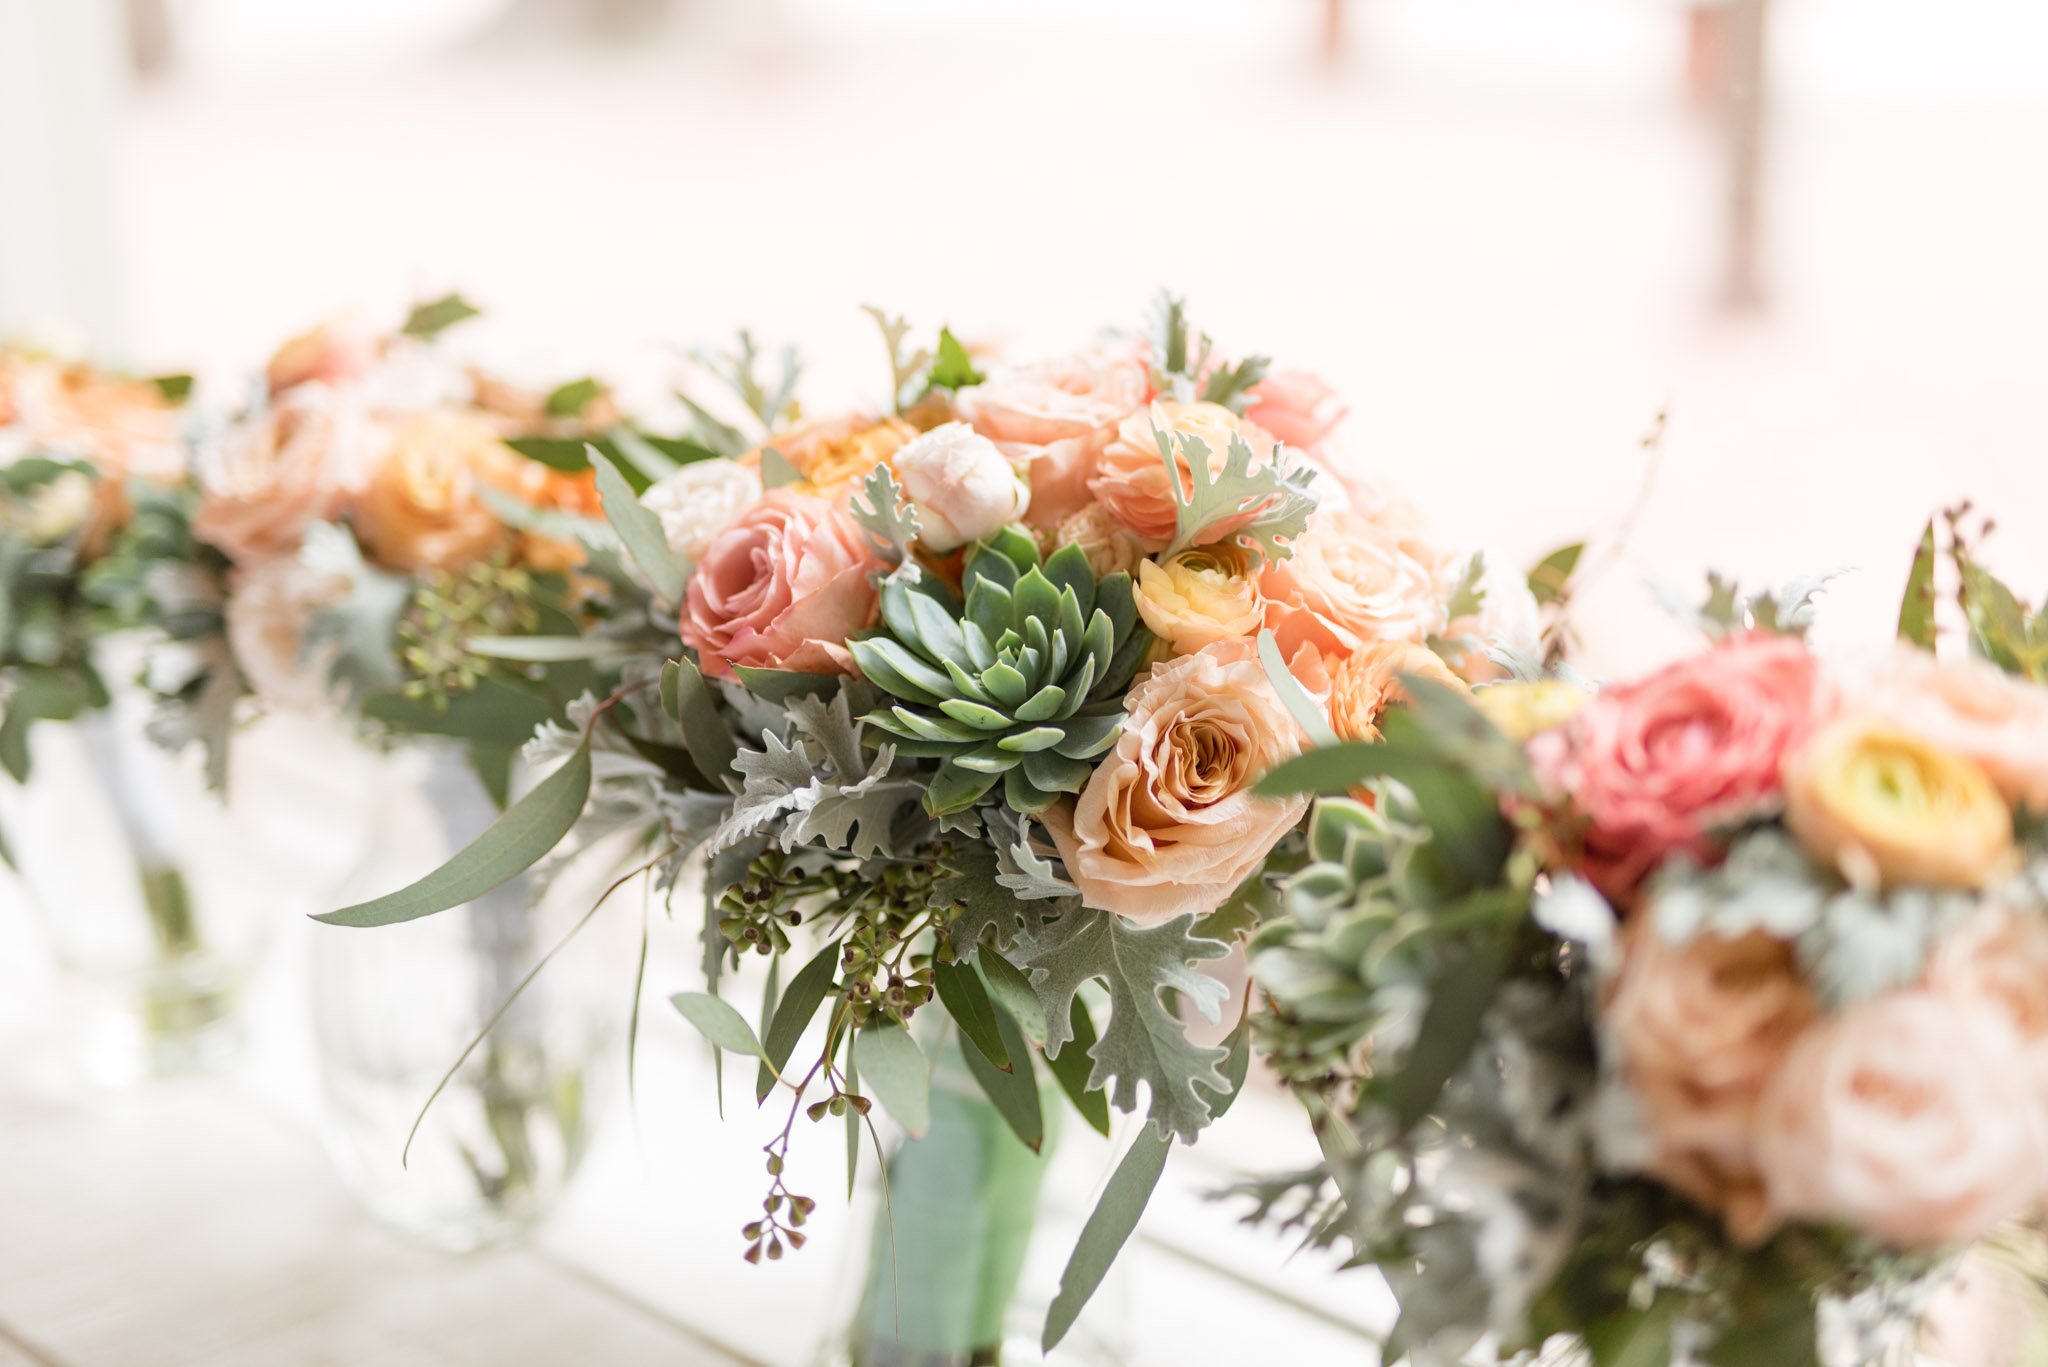 Wedding bouquets with succulents sit in vases.